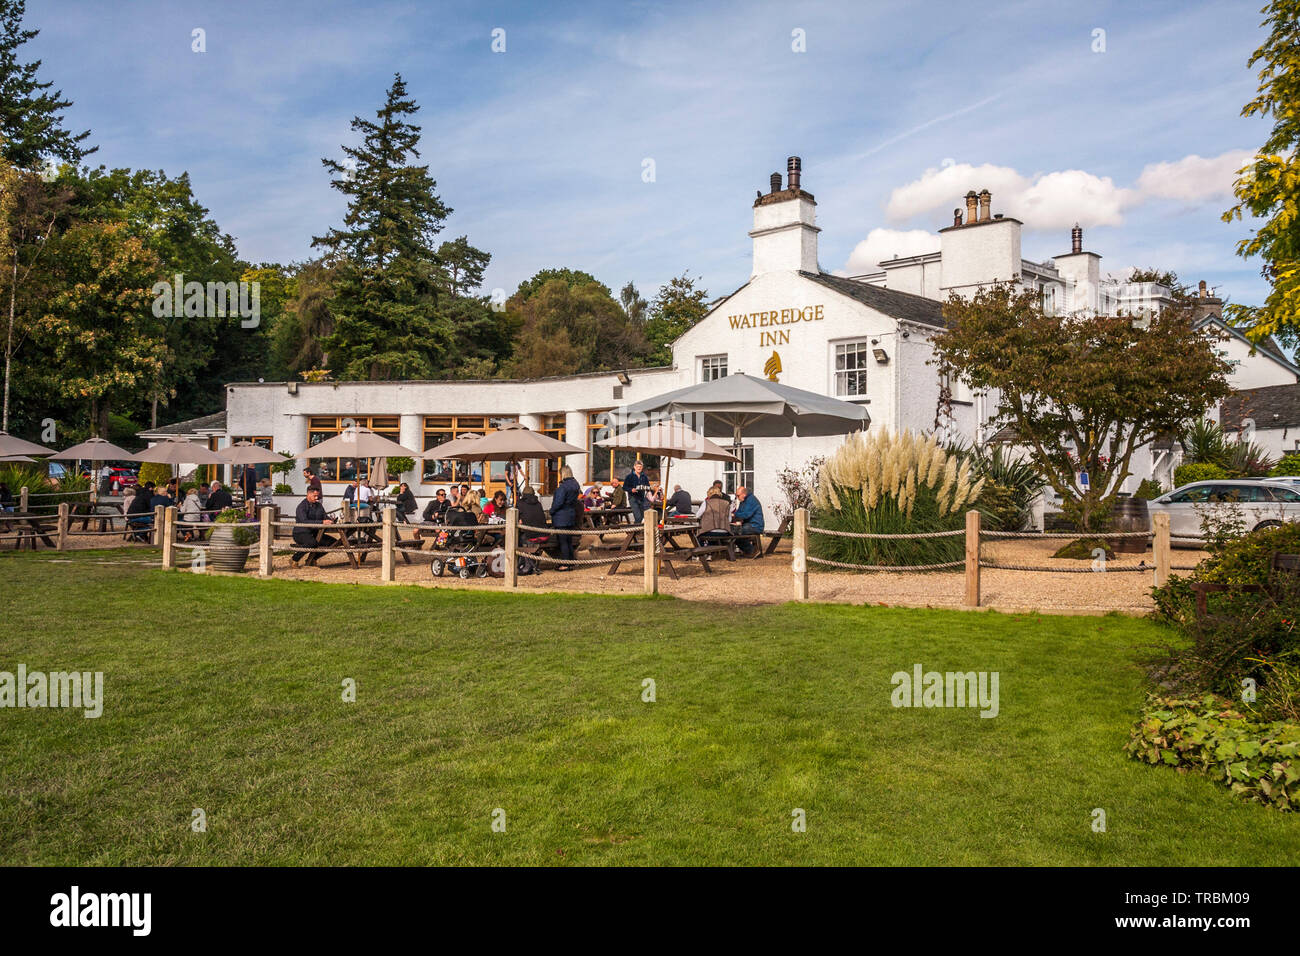 People enjoying a drink at the Wateredge Inn at Lake Windermere in Ambleside,Cumbria,England Stock Photo